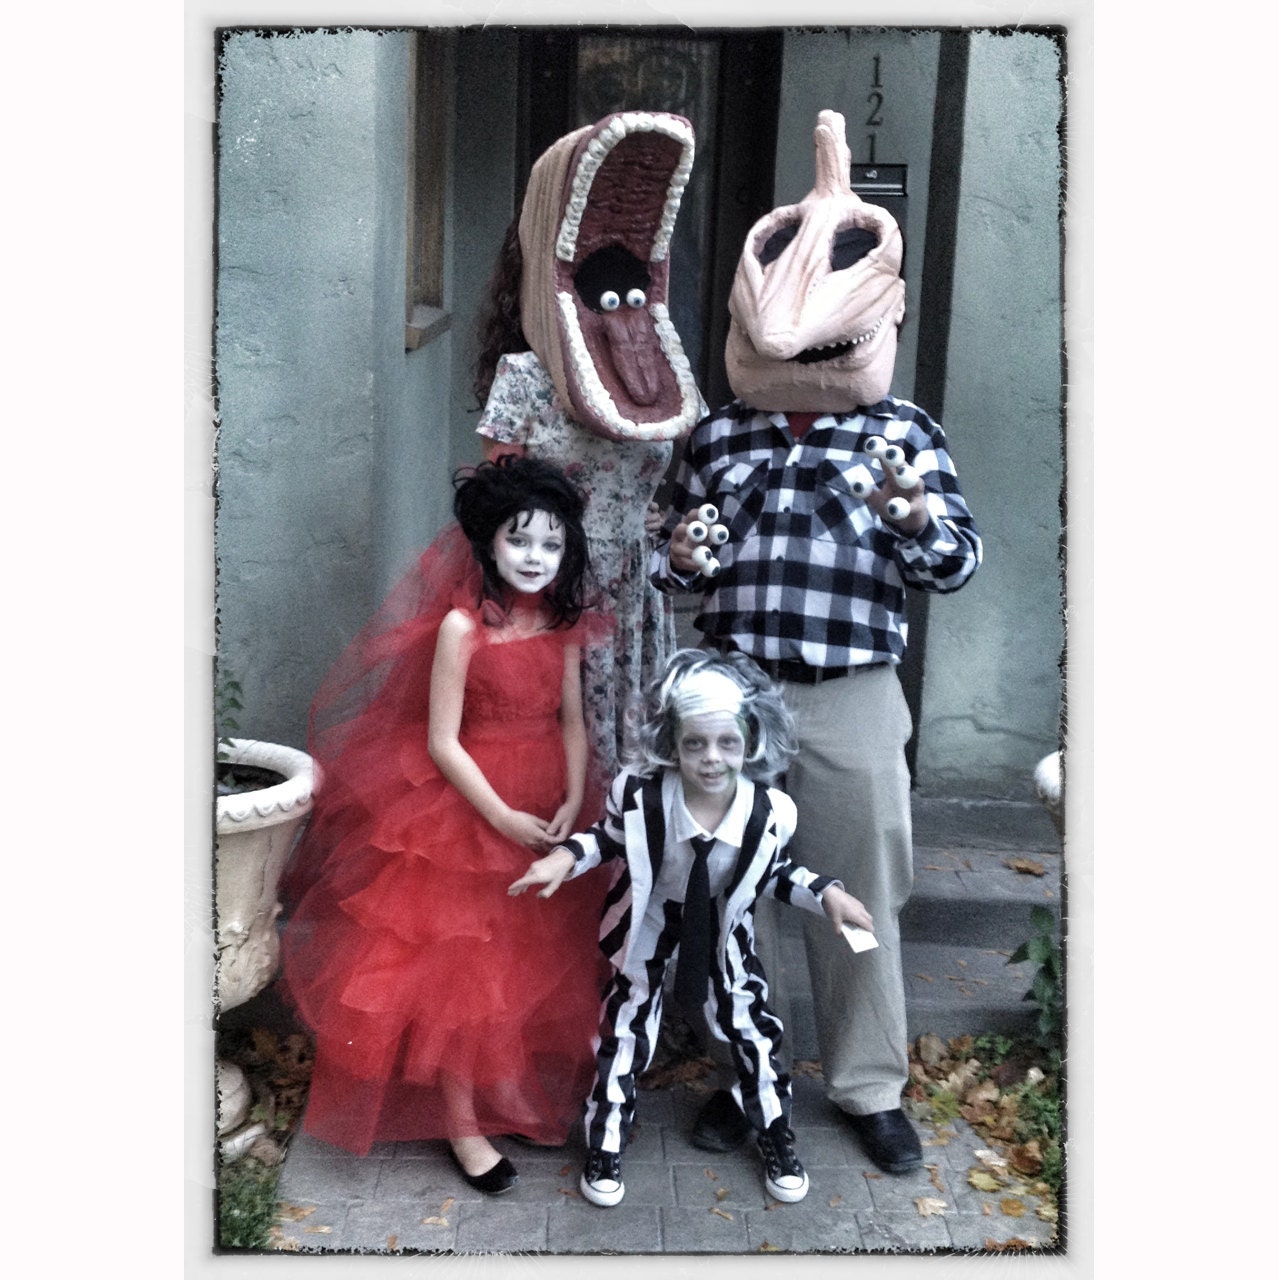 Beetlejuice Family Costume image picture